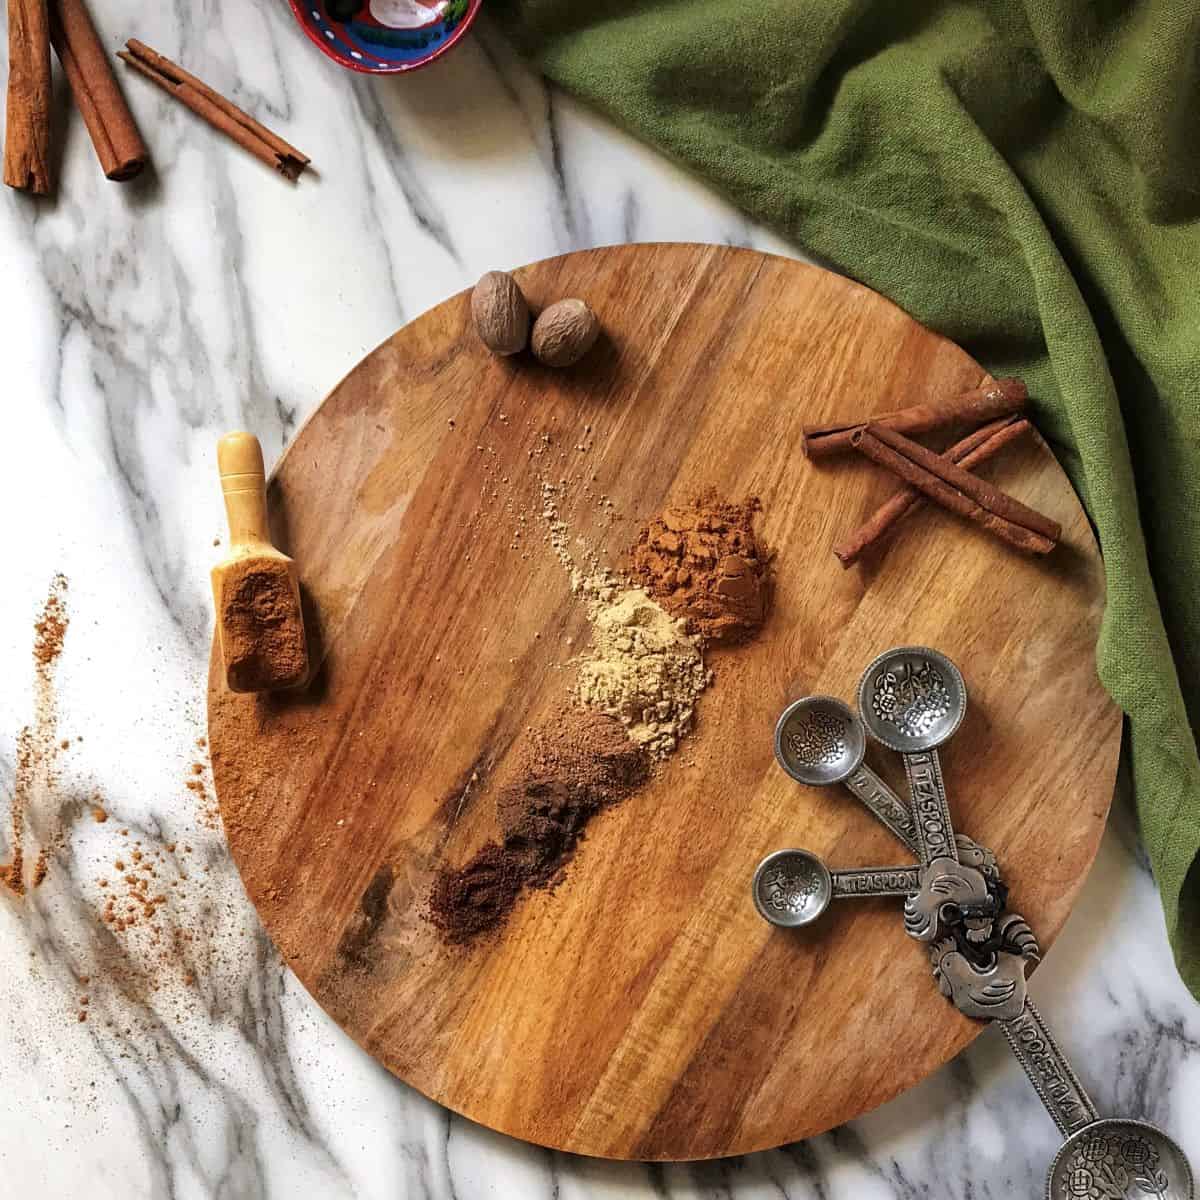 An overhead photo of ground spices like nutmeg, cinnamon and cloves on a wooden board.